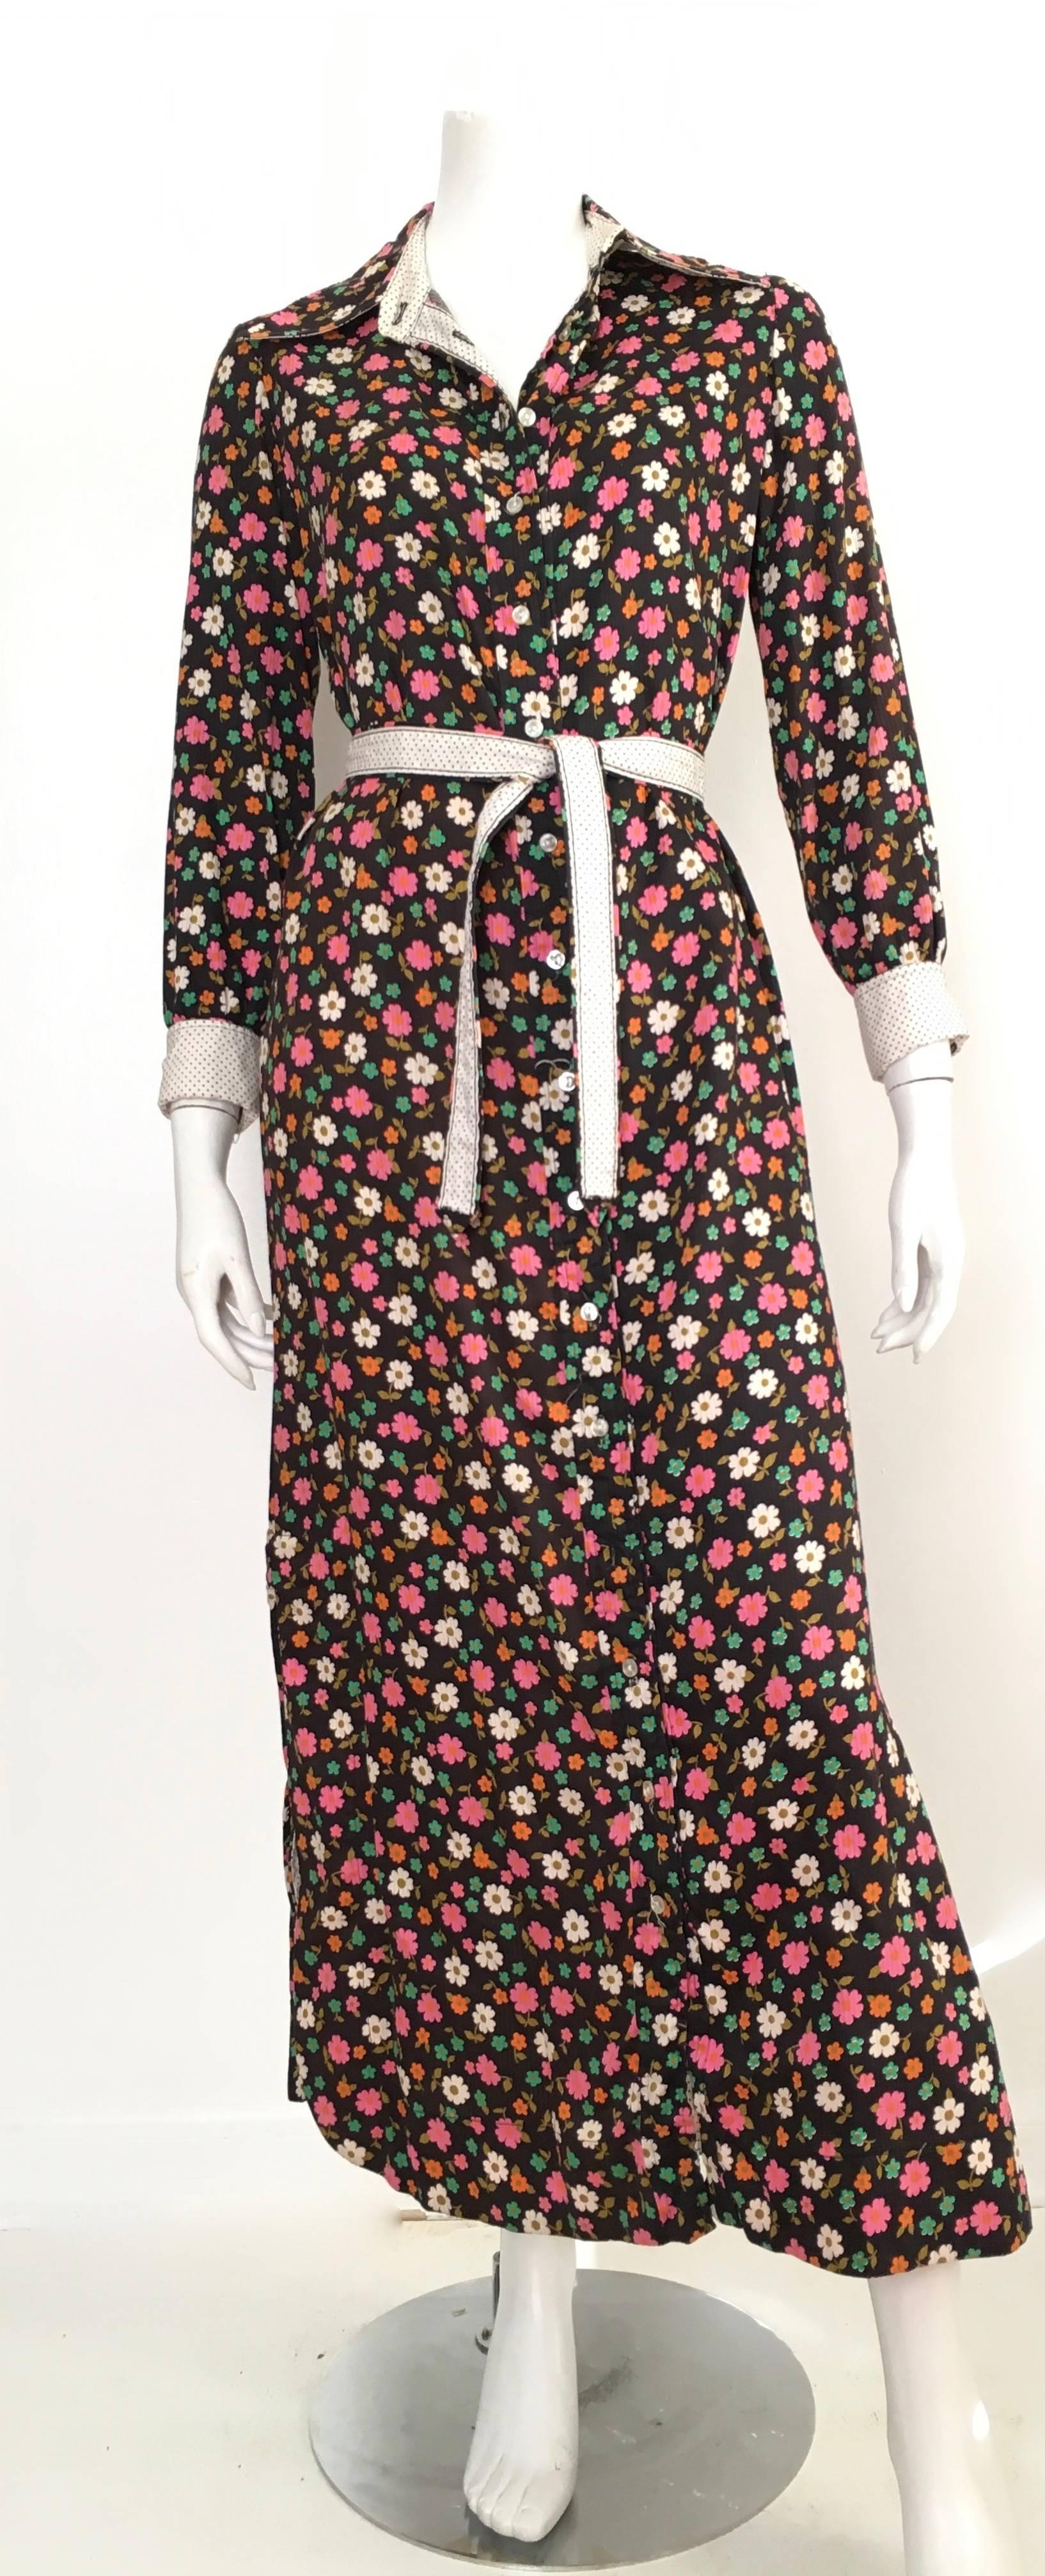 Geoffrey Beene 1960s Floral Cotton Button Up Dress with Belt Size 8. For Sale 4